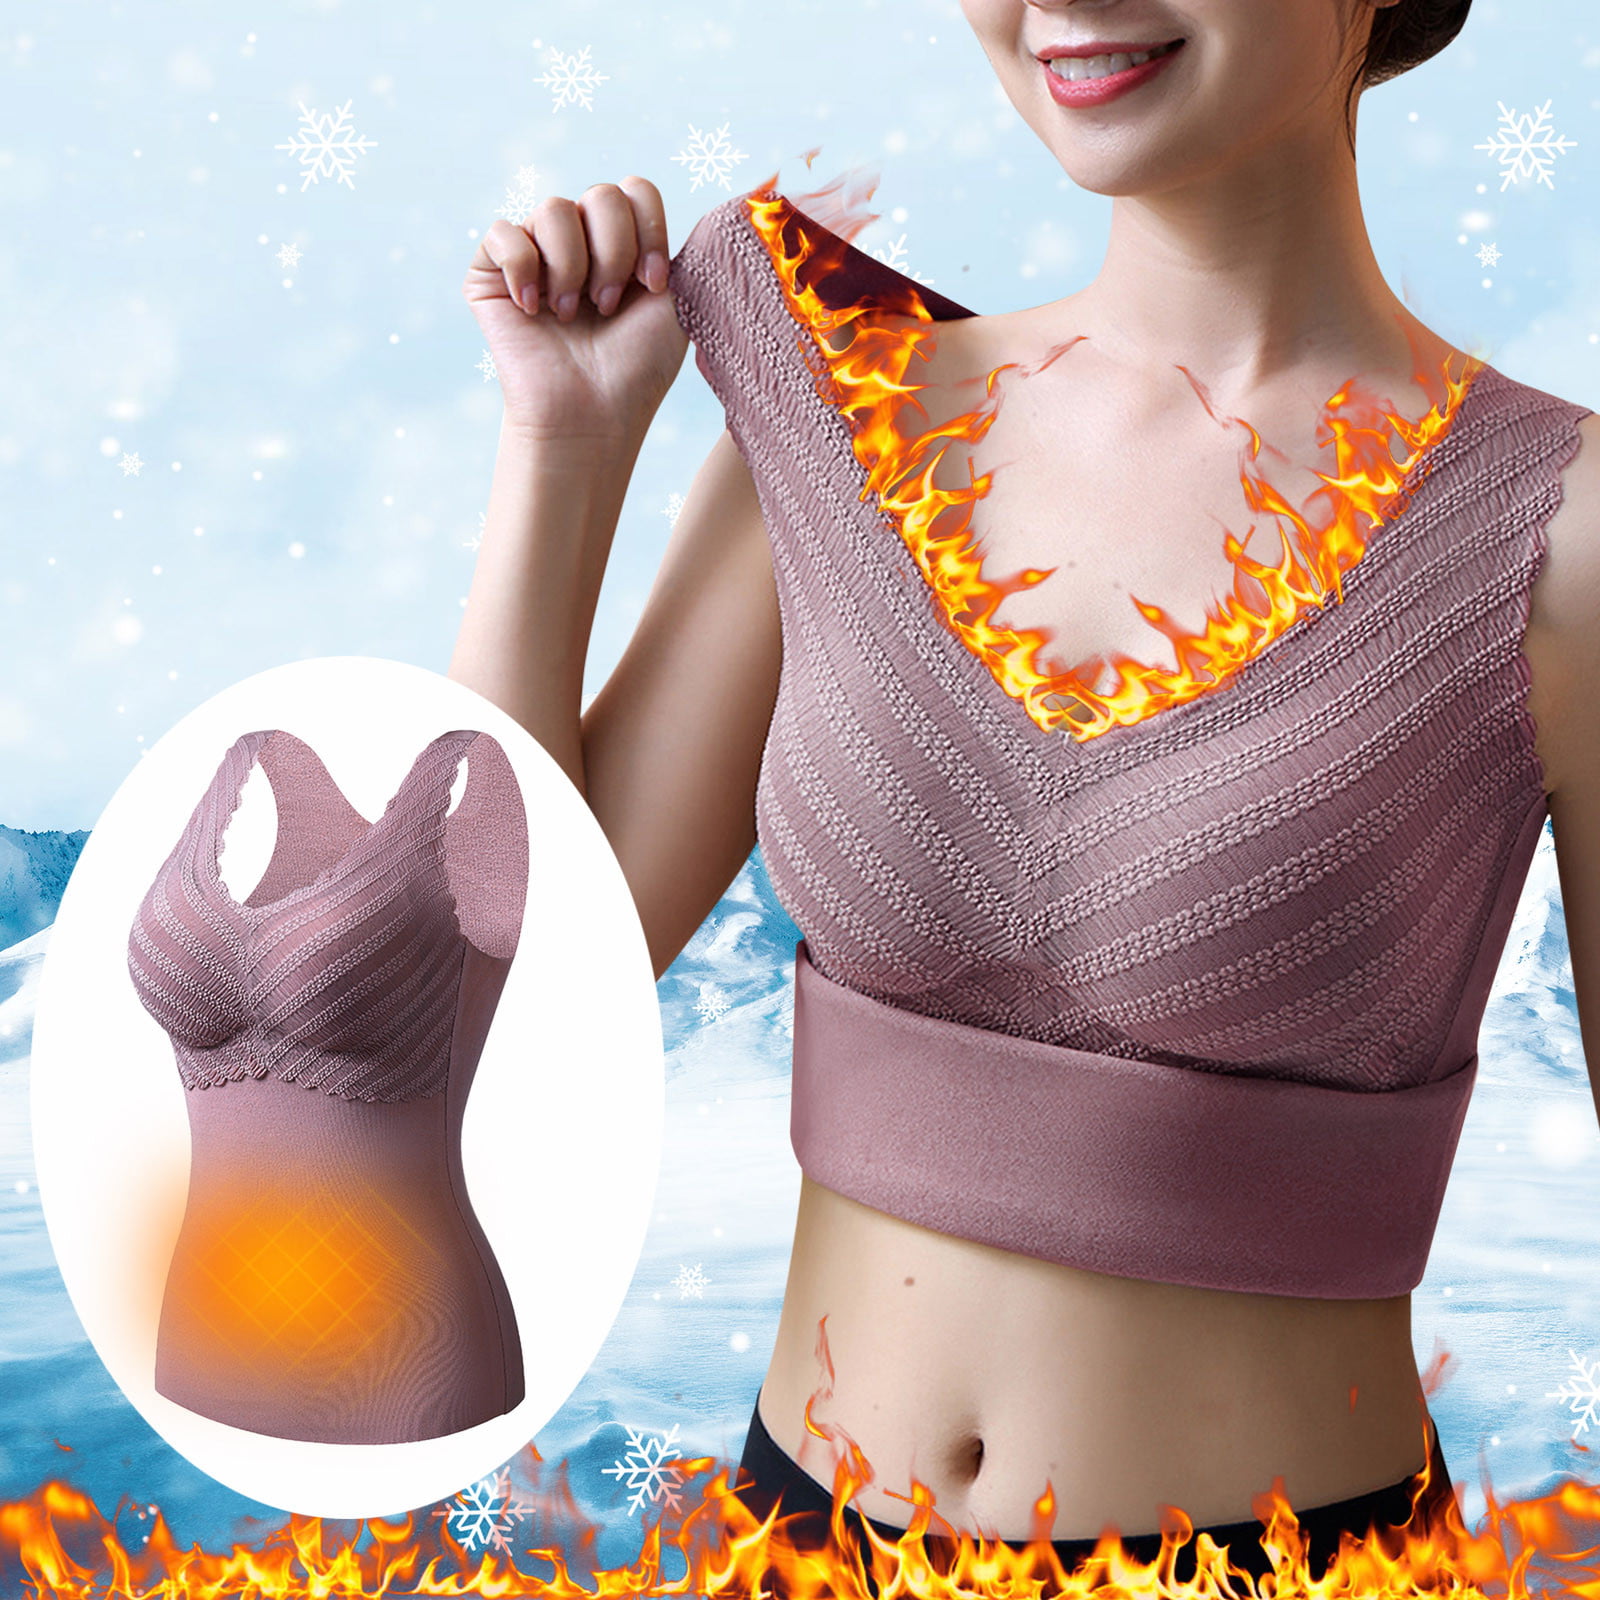 Slim Fit Tops For Womens Sleeveless Thermal Shirts V Neck Vest With Built  In Bra Lined Underwear Thermal Tank Top With Spongy Pad Winter Tops Thermal